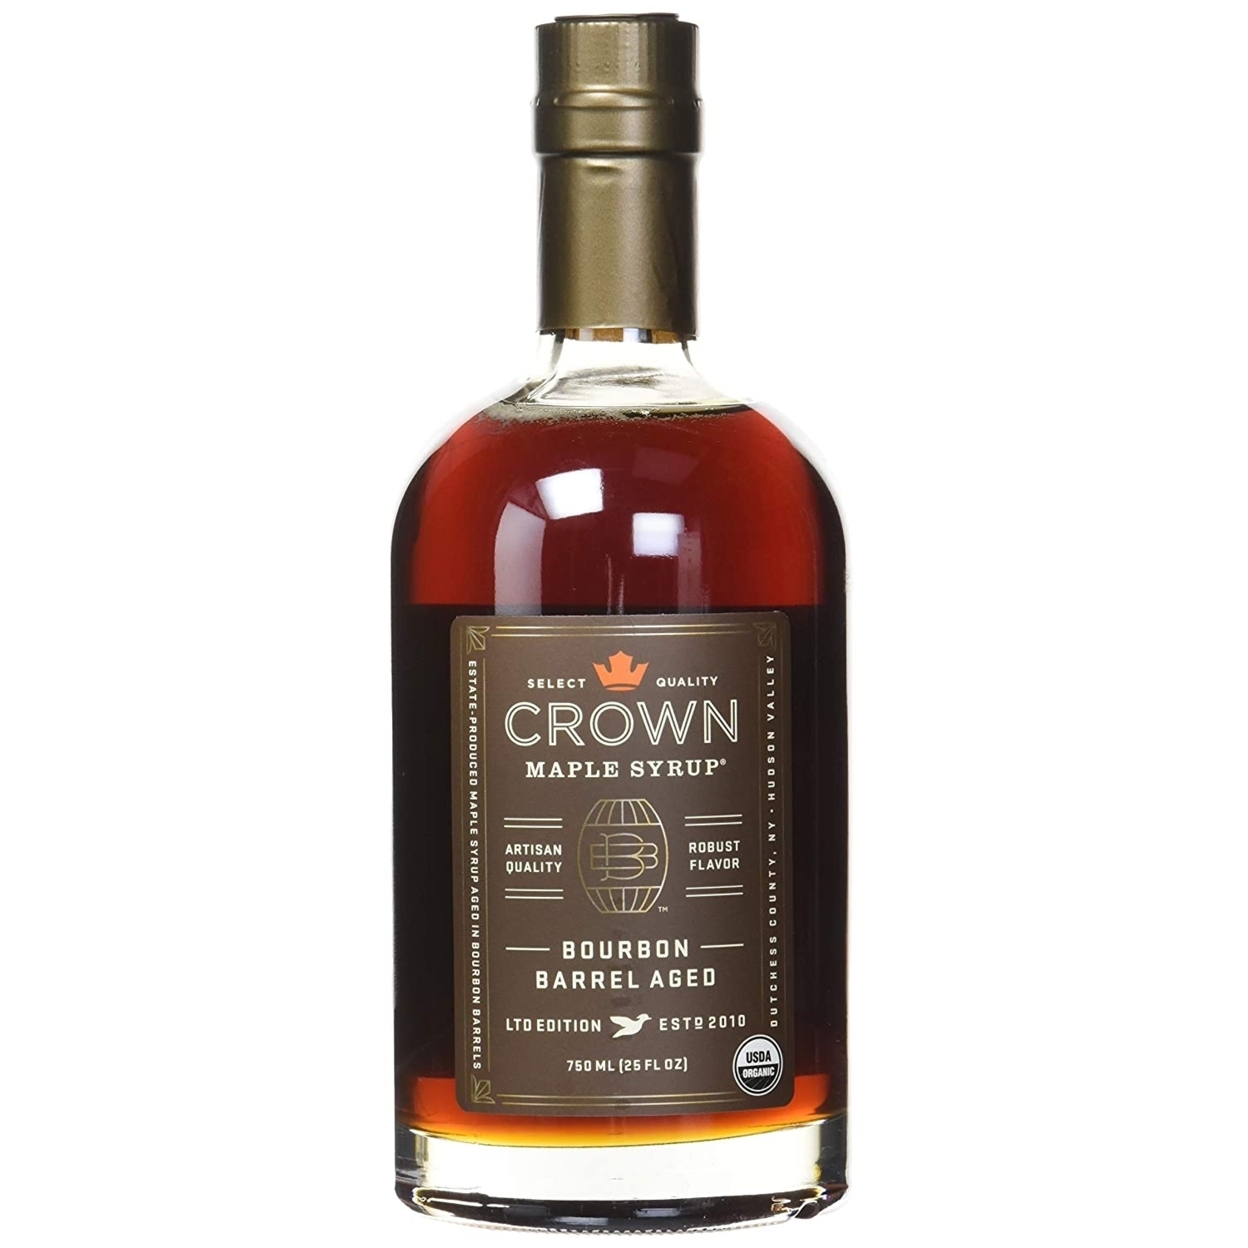 Crown Bourbon Barrel Aged Maple Syrup With Robust Flavor, 25 Fluid Ounce